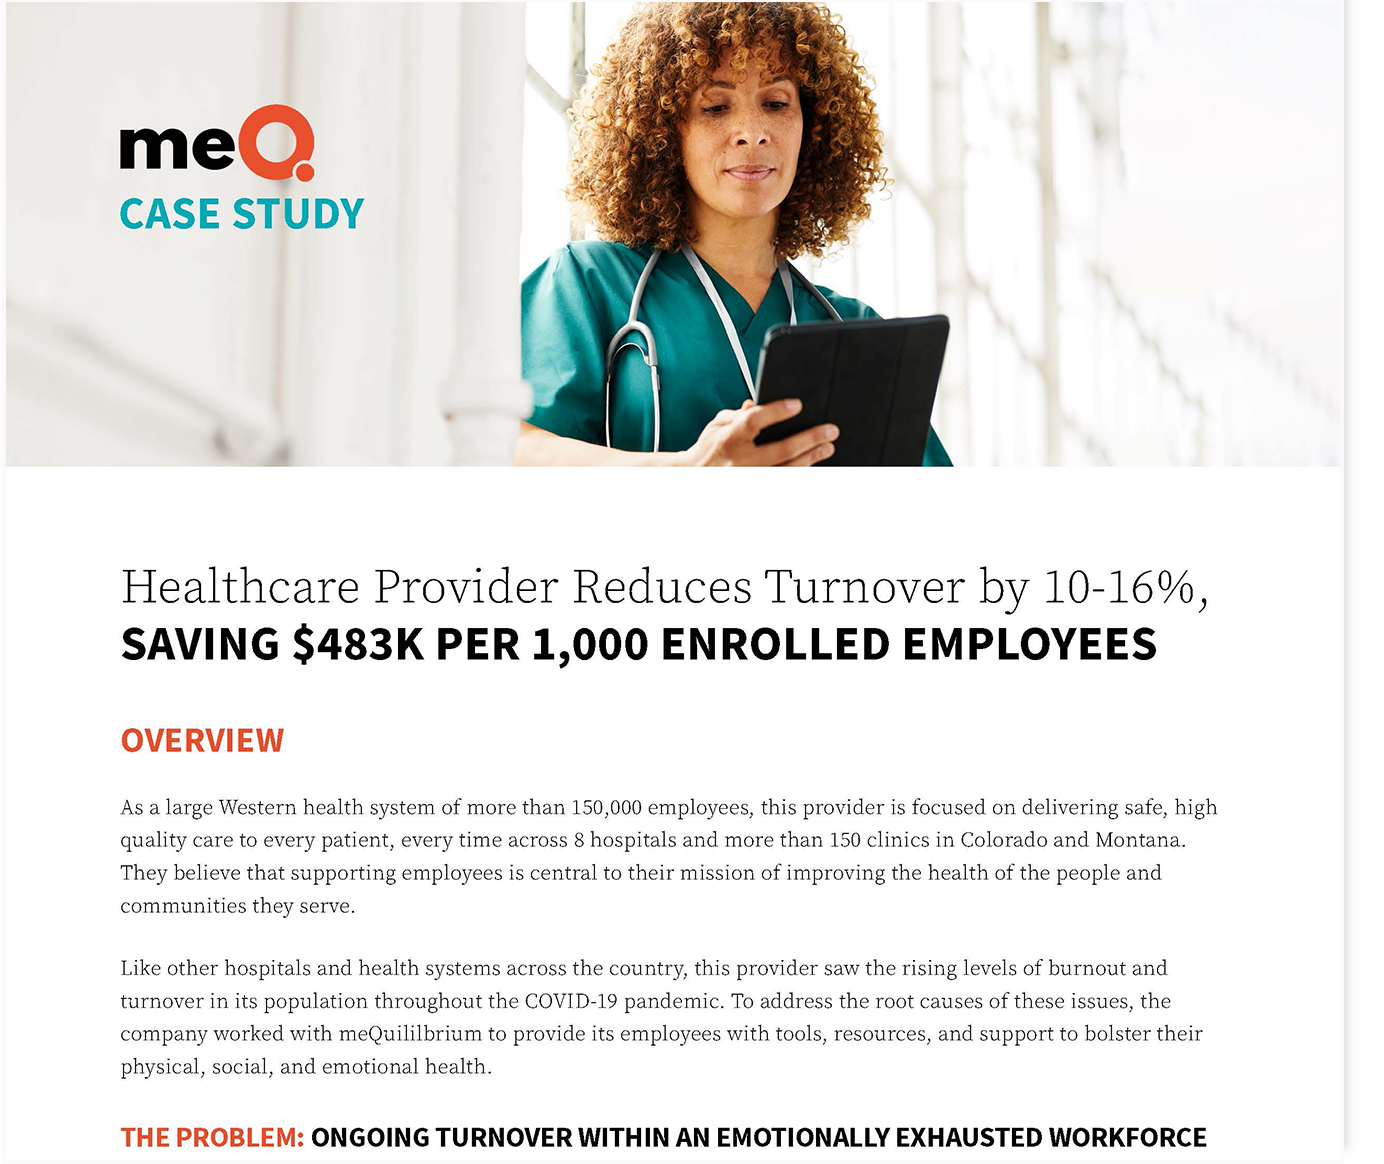 Reducing Turnover by Up to 16% for Healthcare Provider